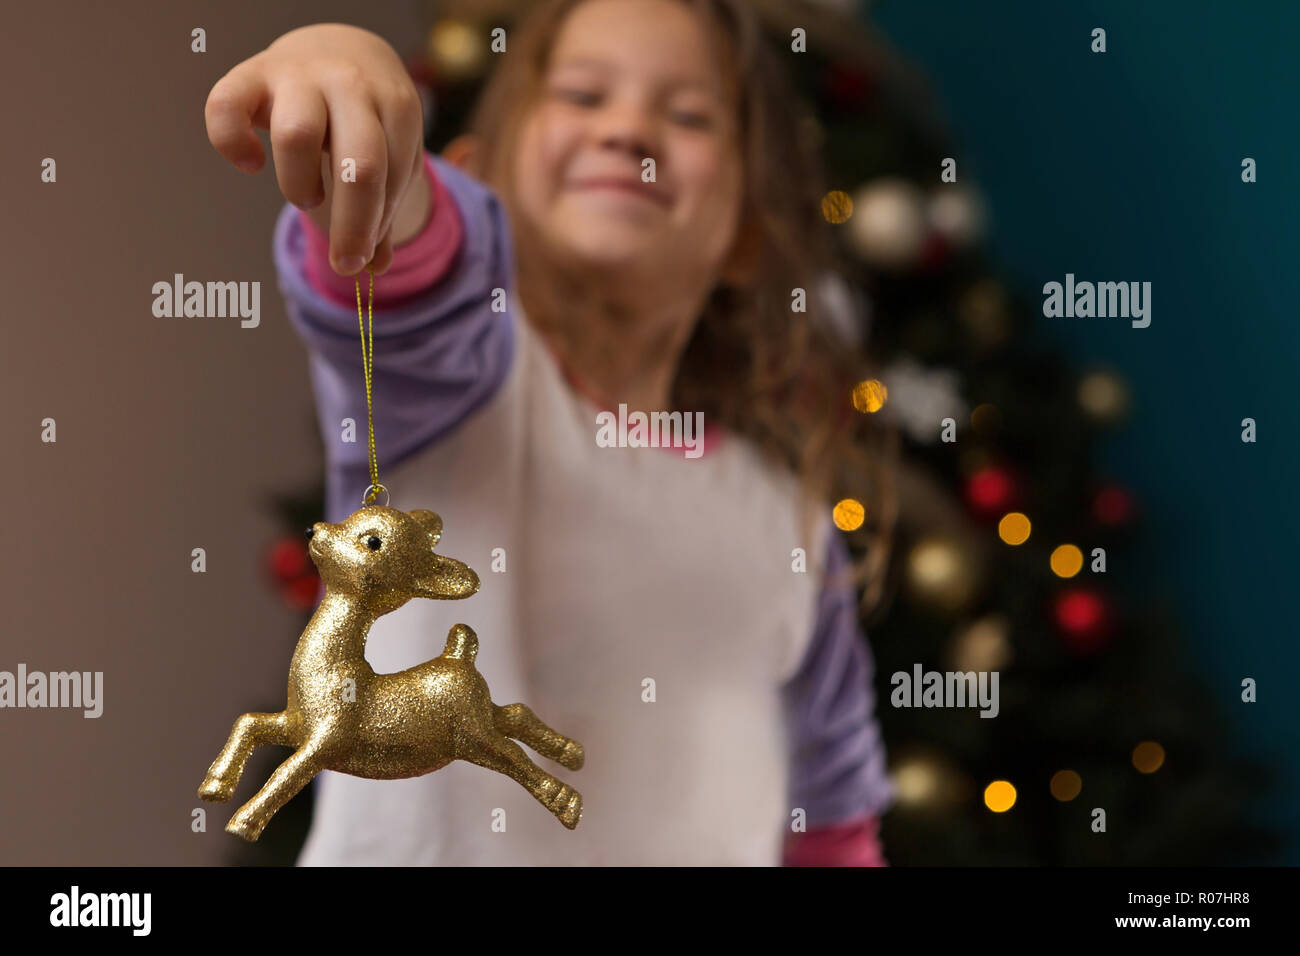 Happy Young Girl Smiling Holding Gold Reindeer Ornament Stock Photo